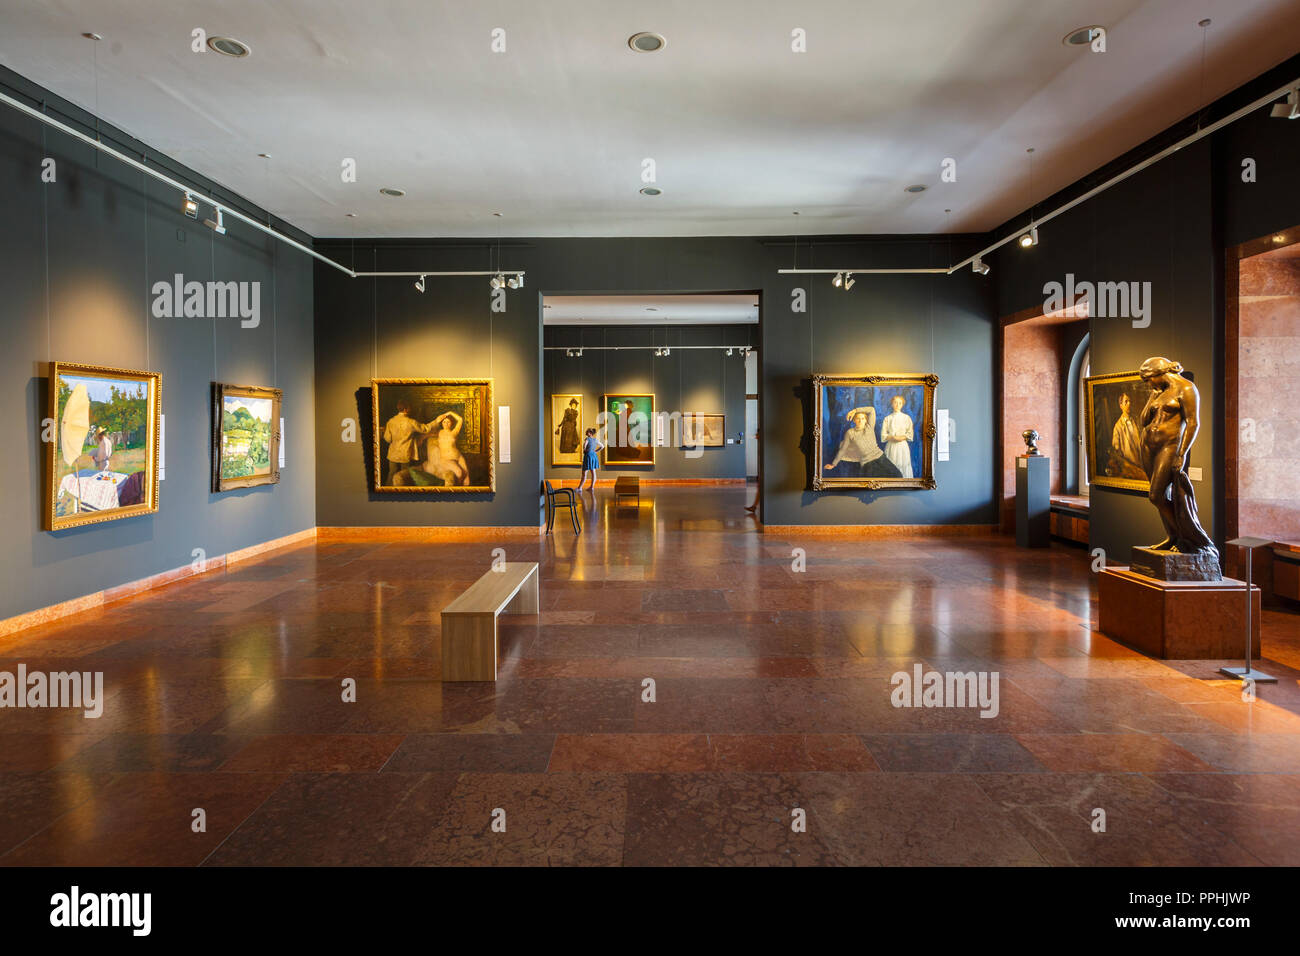 Budapest, Hungary - August 16, 2018: Interior of the Hungarian National Gallery in Budapest. Stock Photo